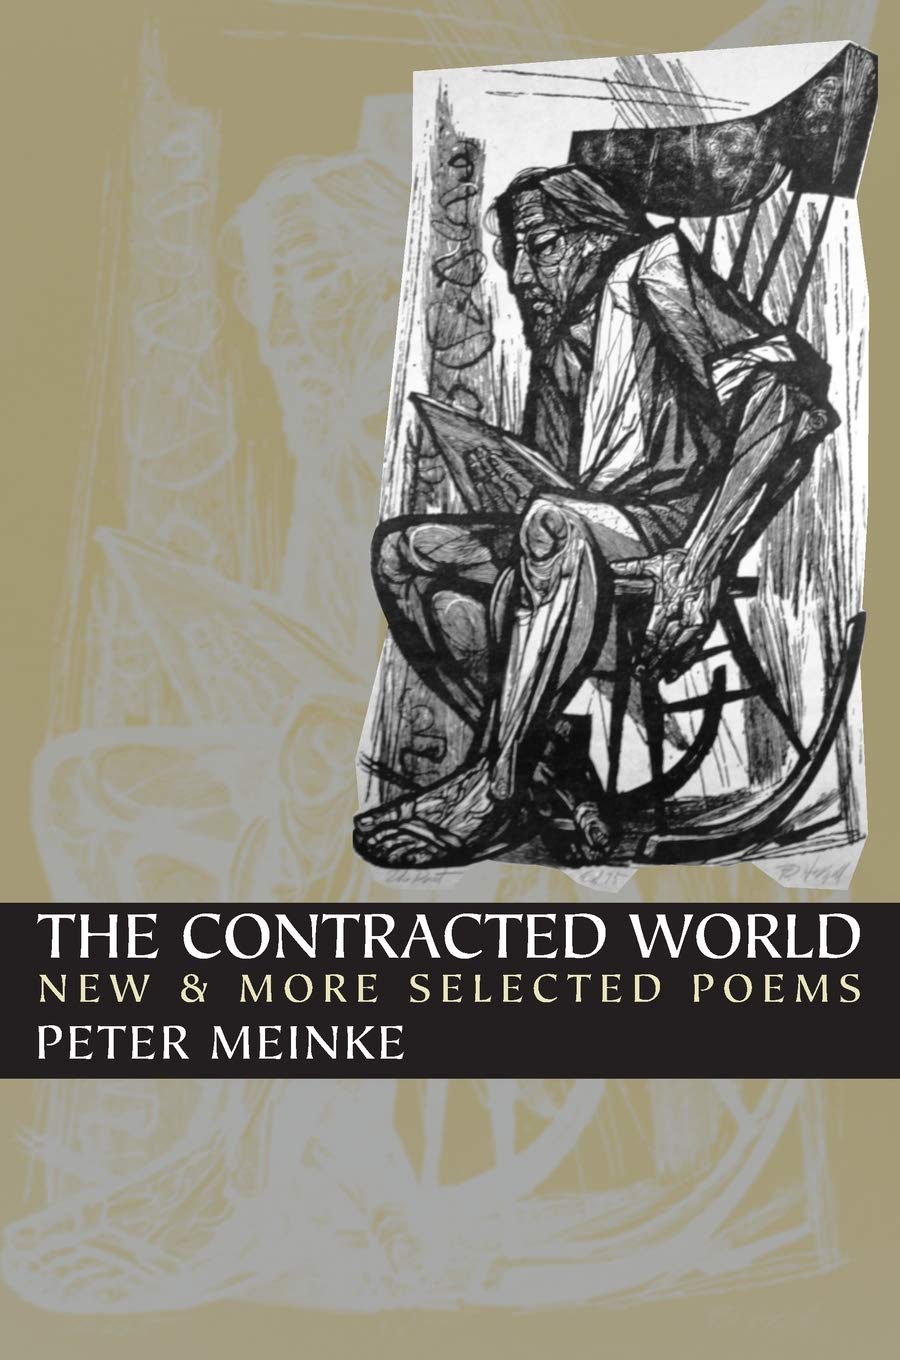 The Contracted World: New & More Selected Poems ***